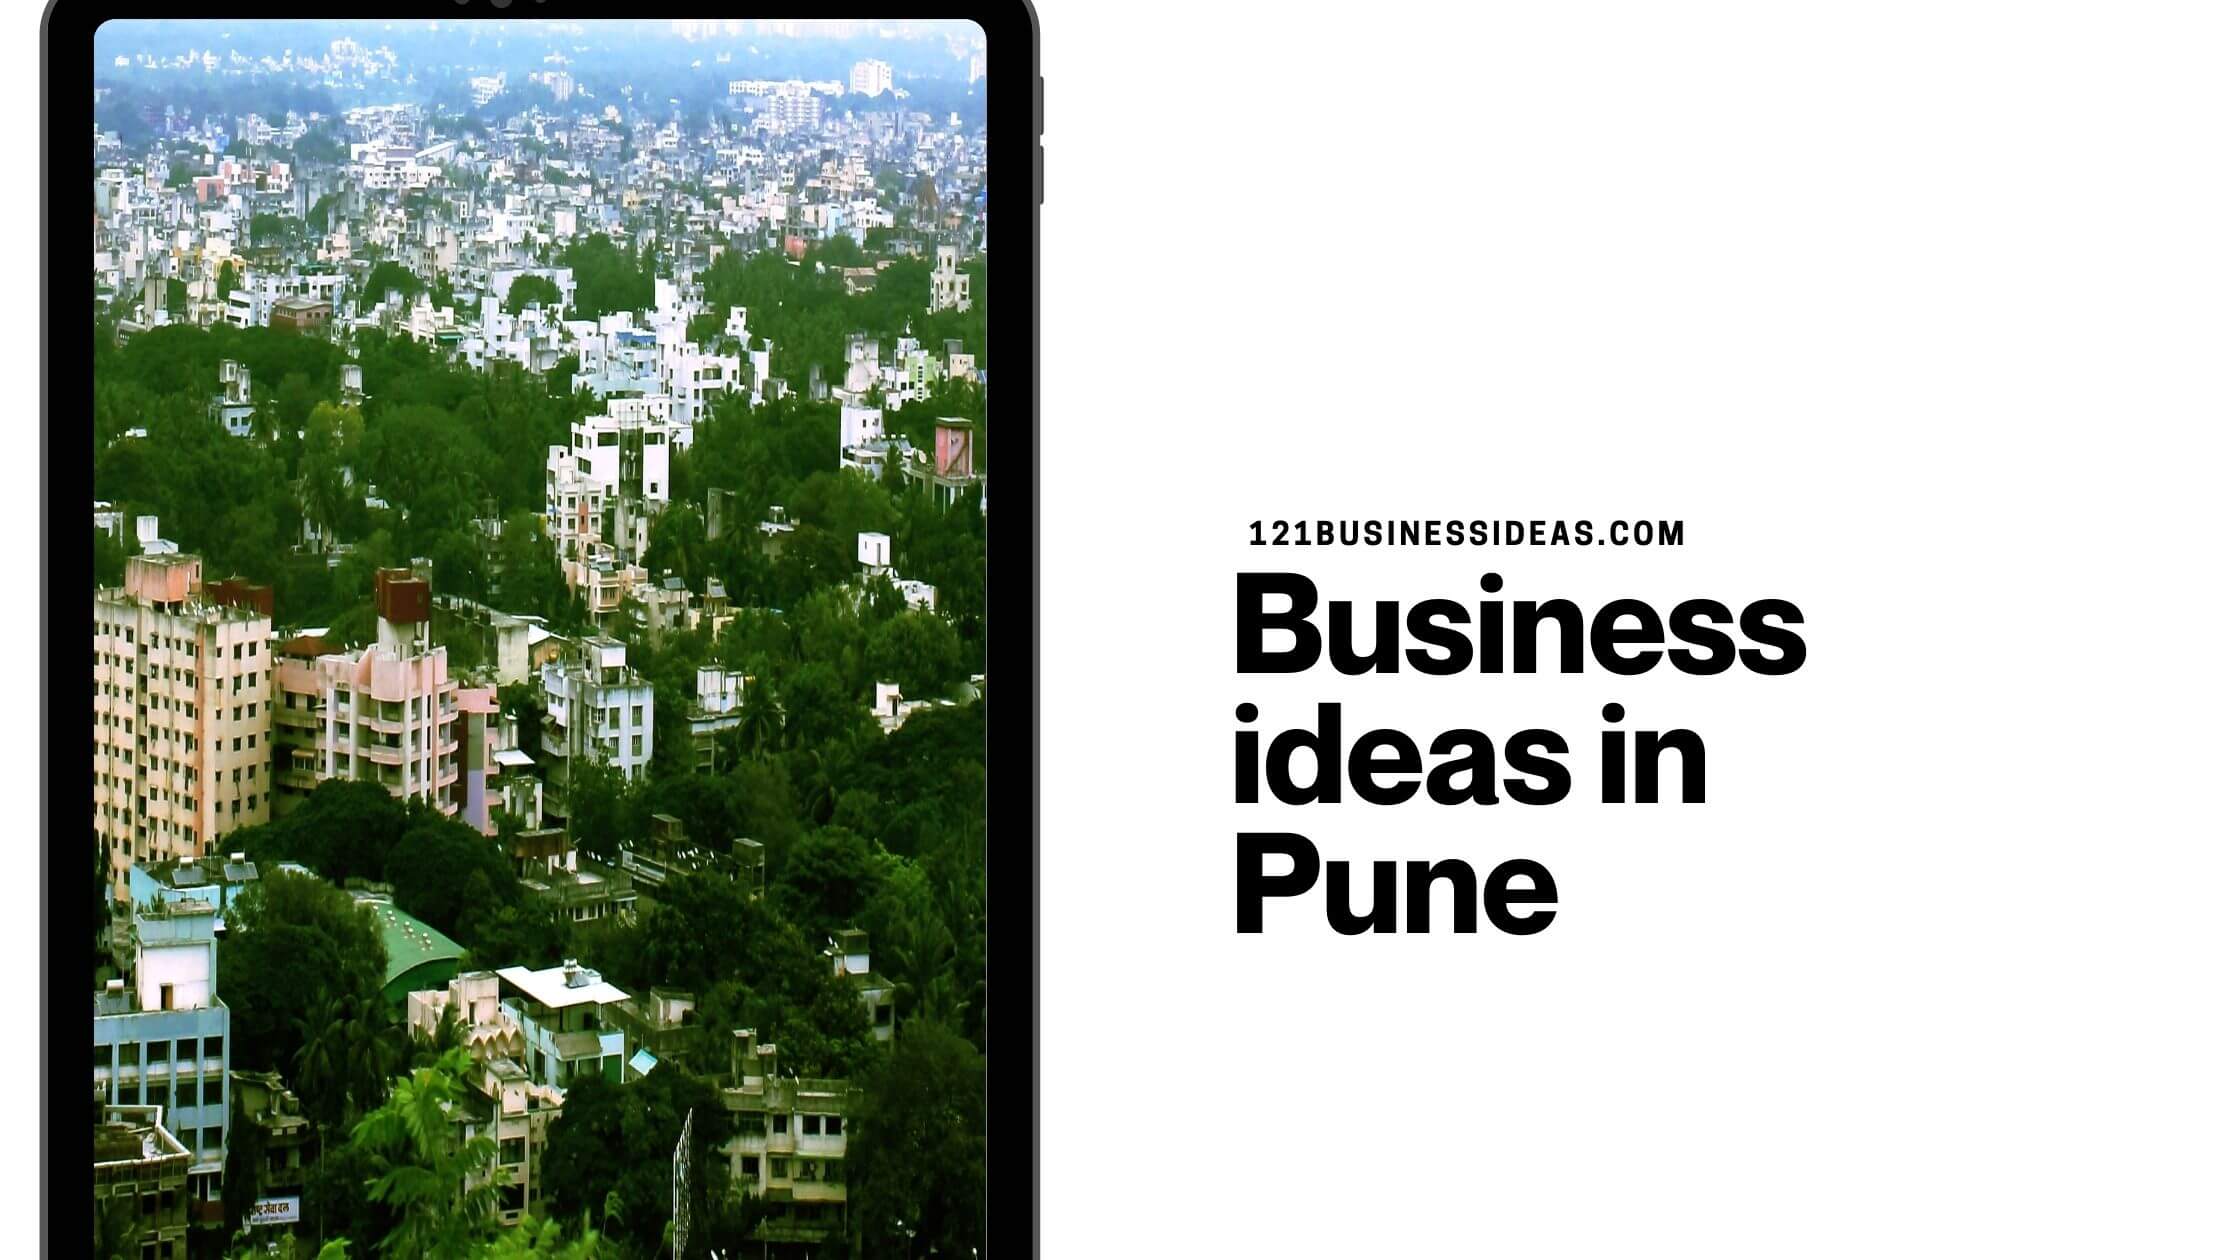 Business ideas in Pune (1)